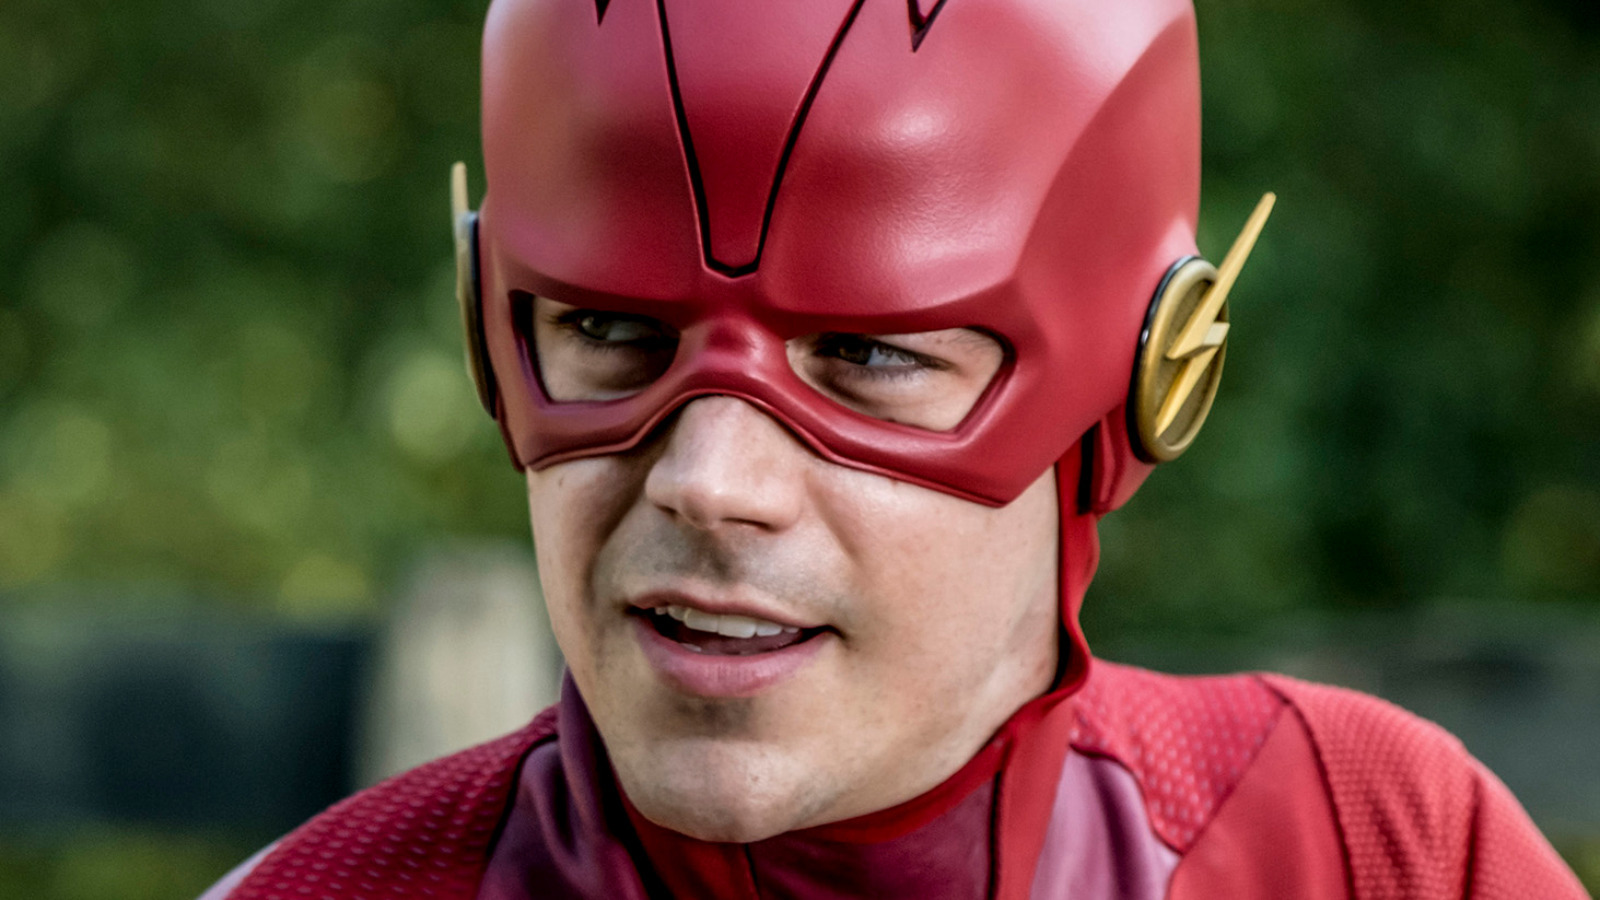 CW Star Grant Gustin Wanted the Flash to Die a Heroic Death